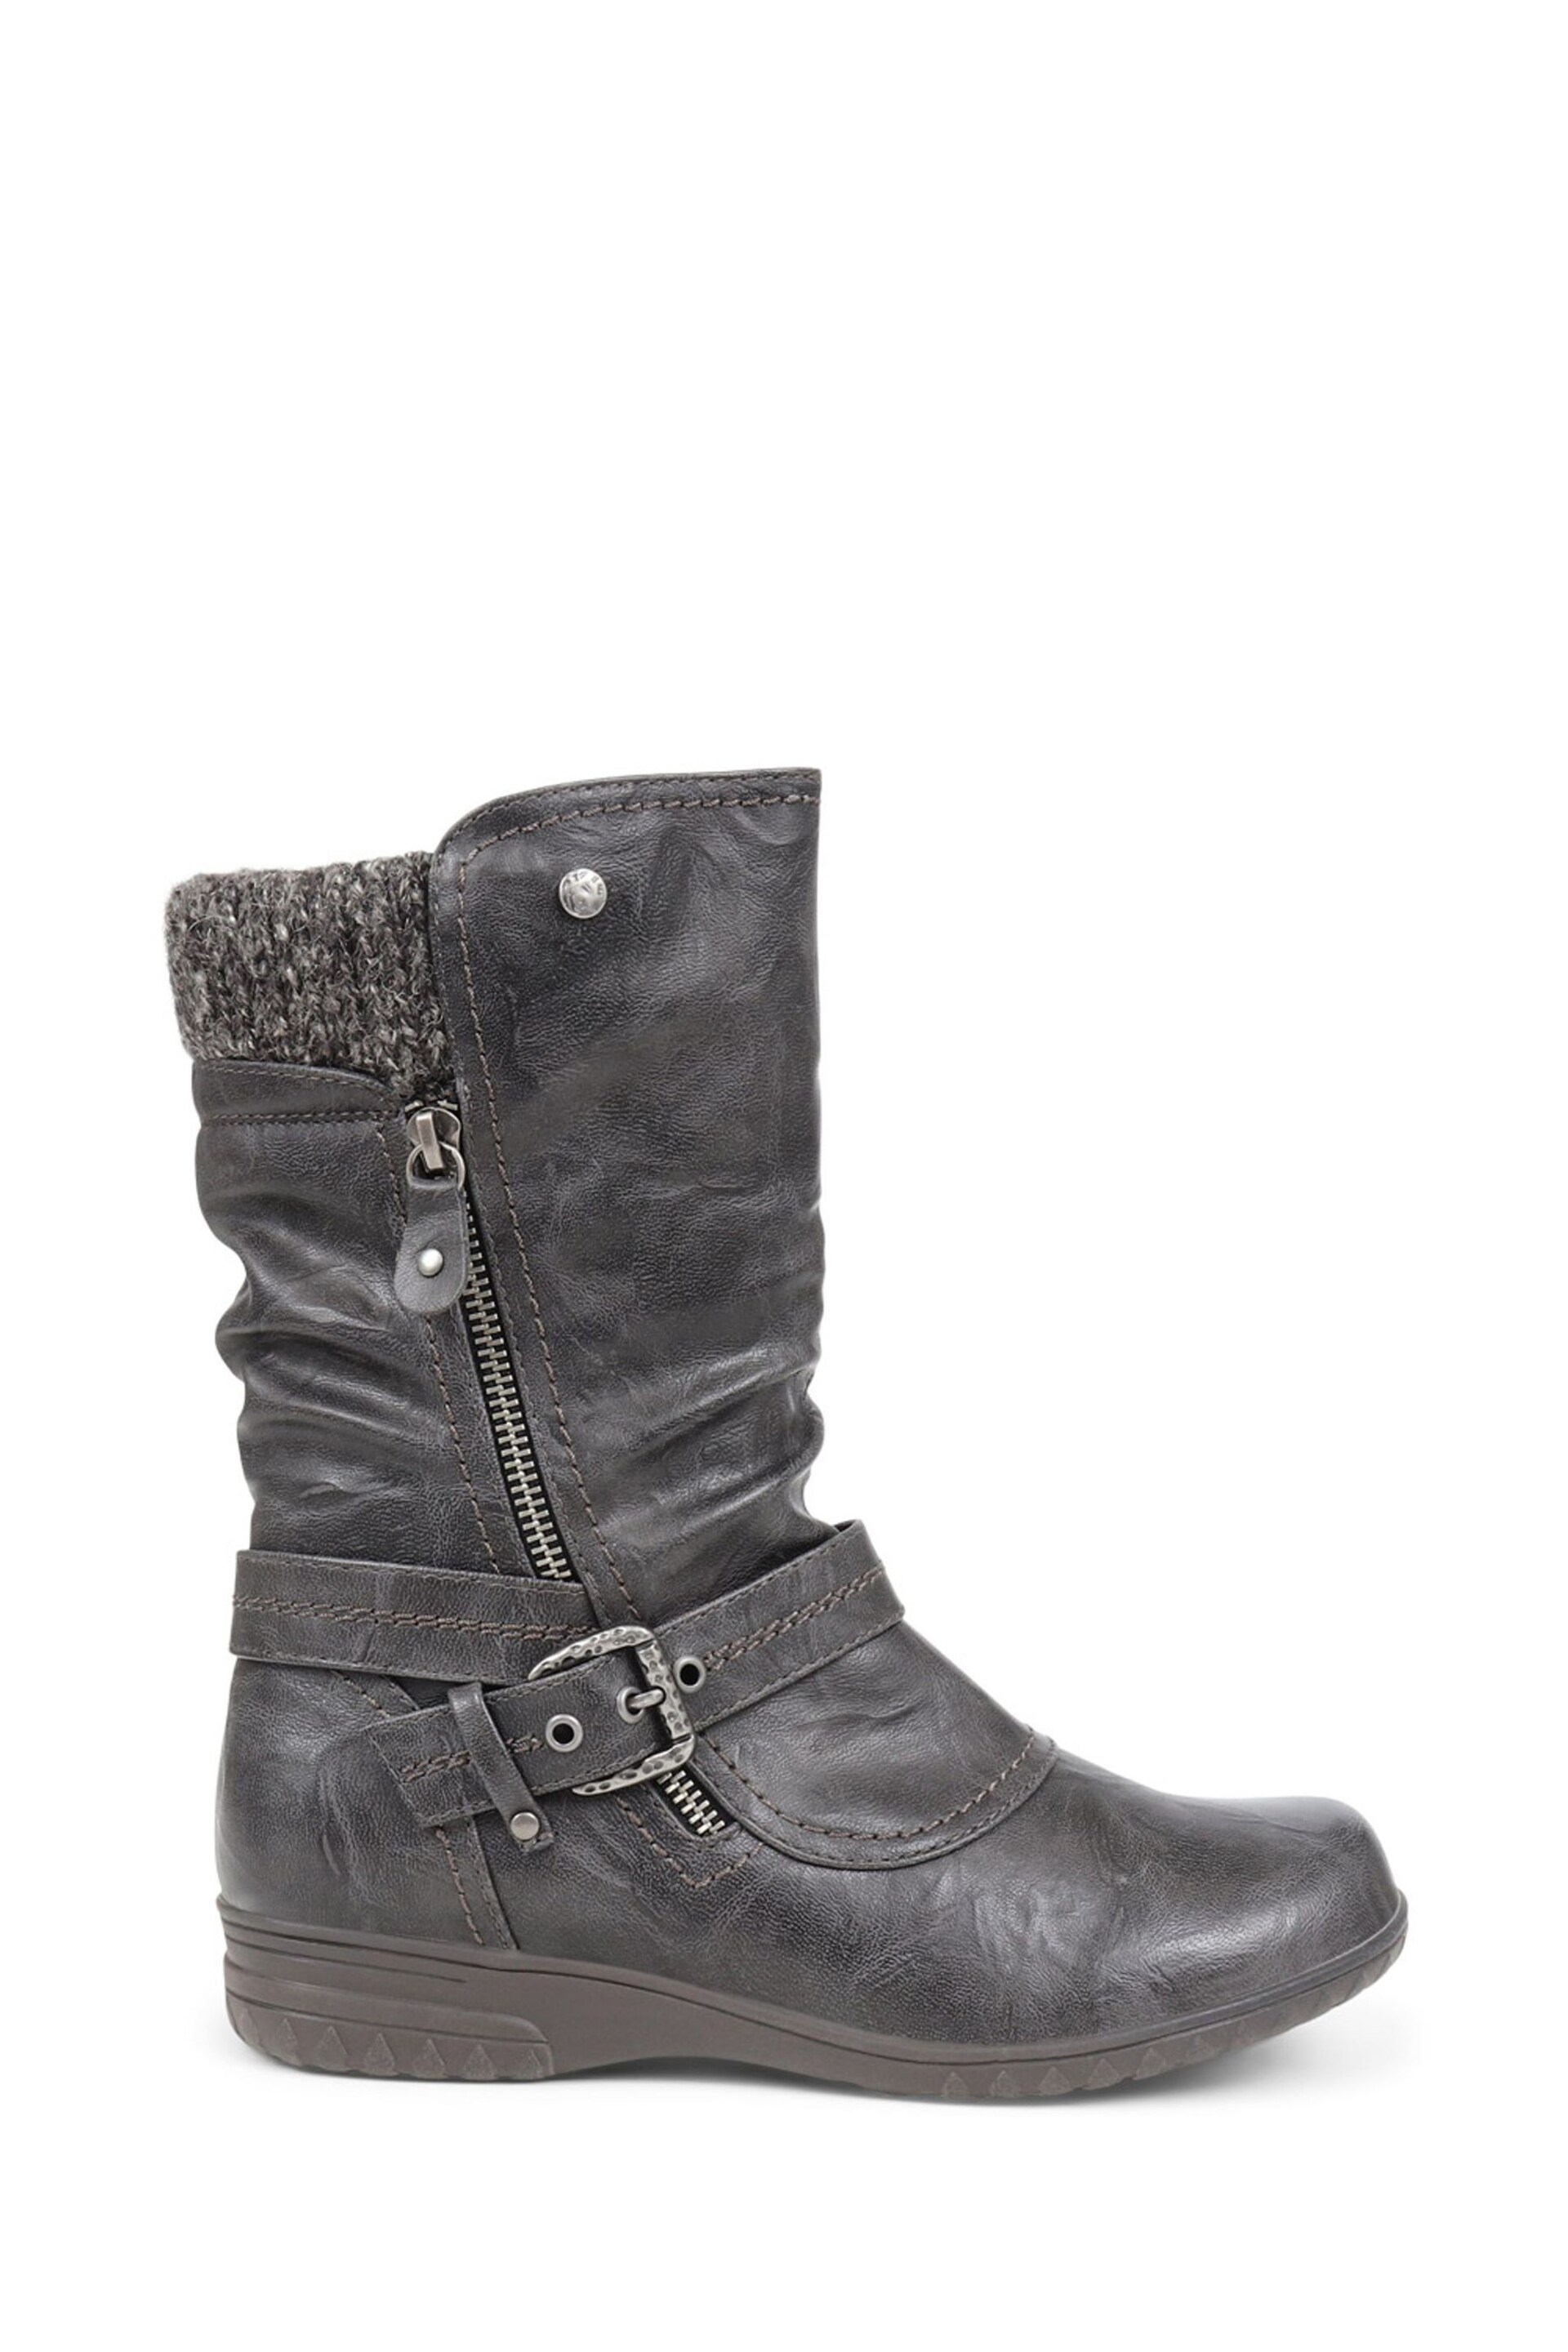 Pavers Grey Slouch Calf Boots - Image 1 of 4